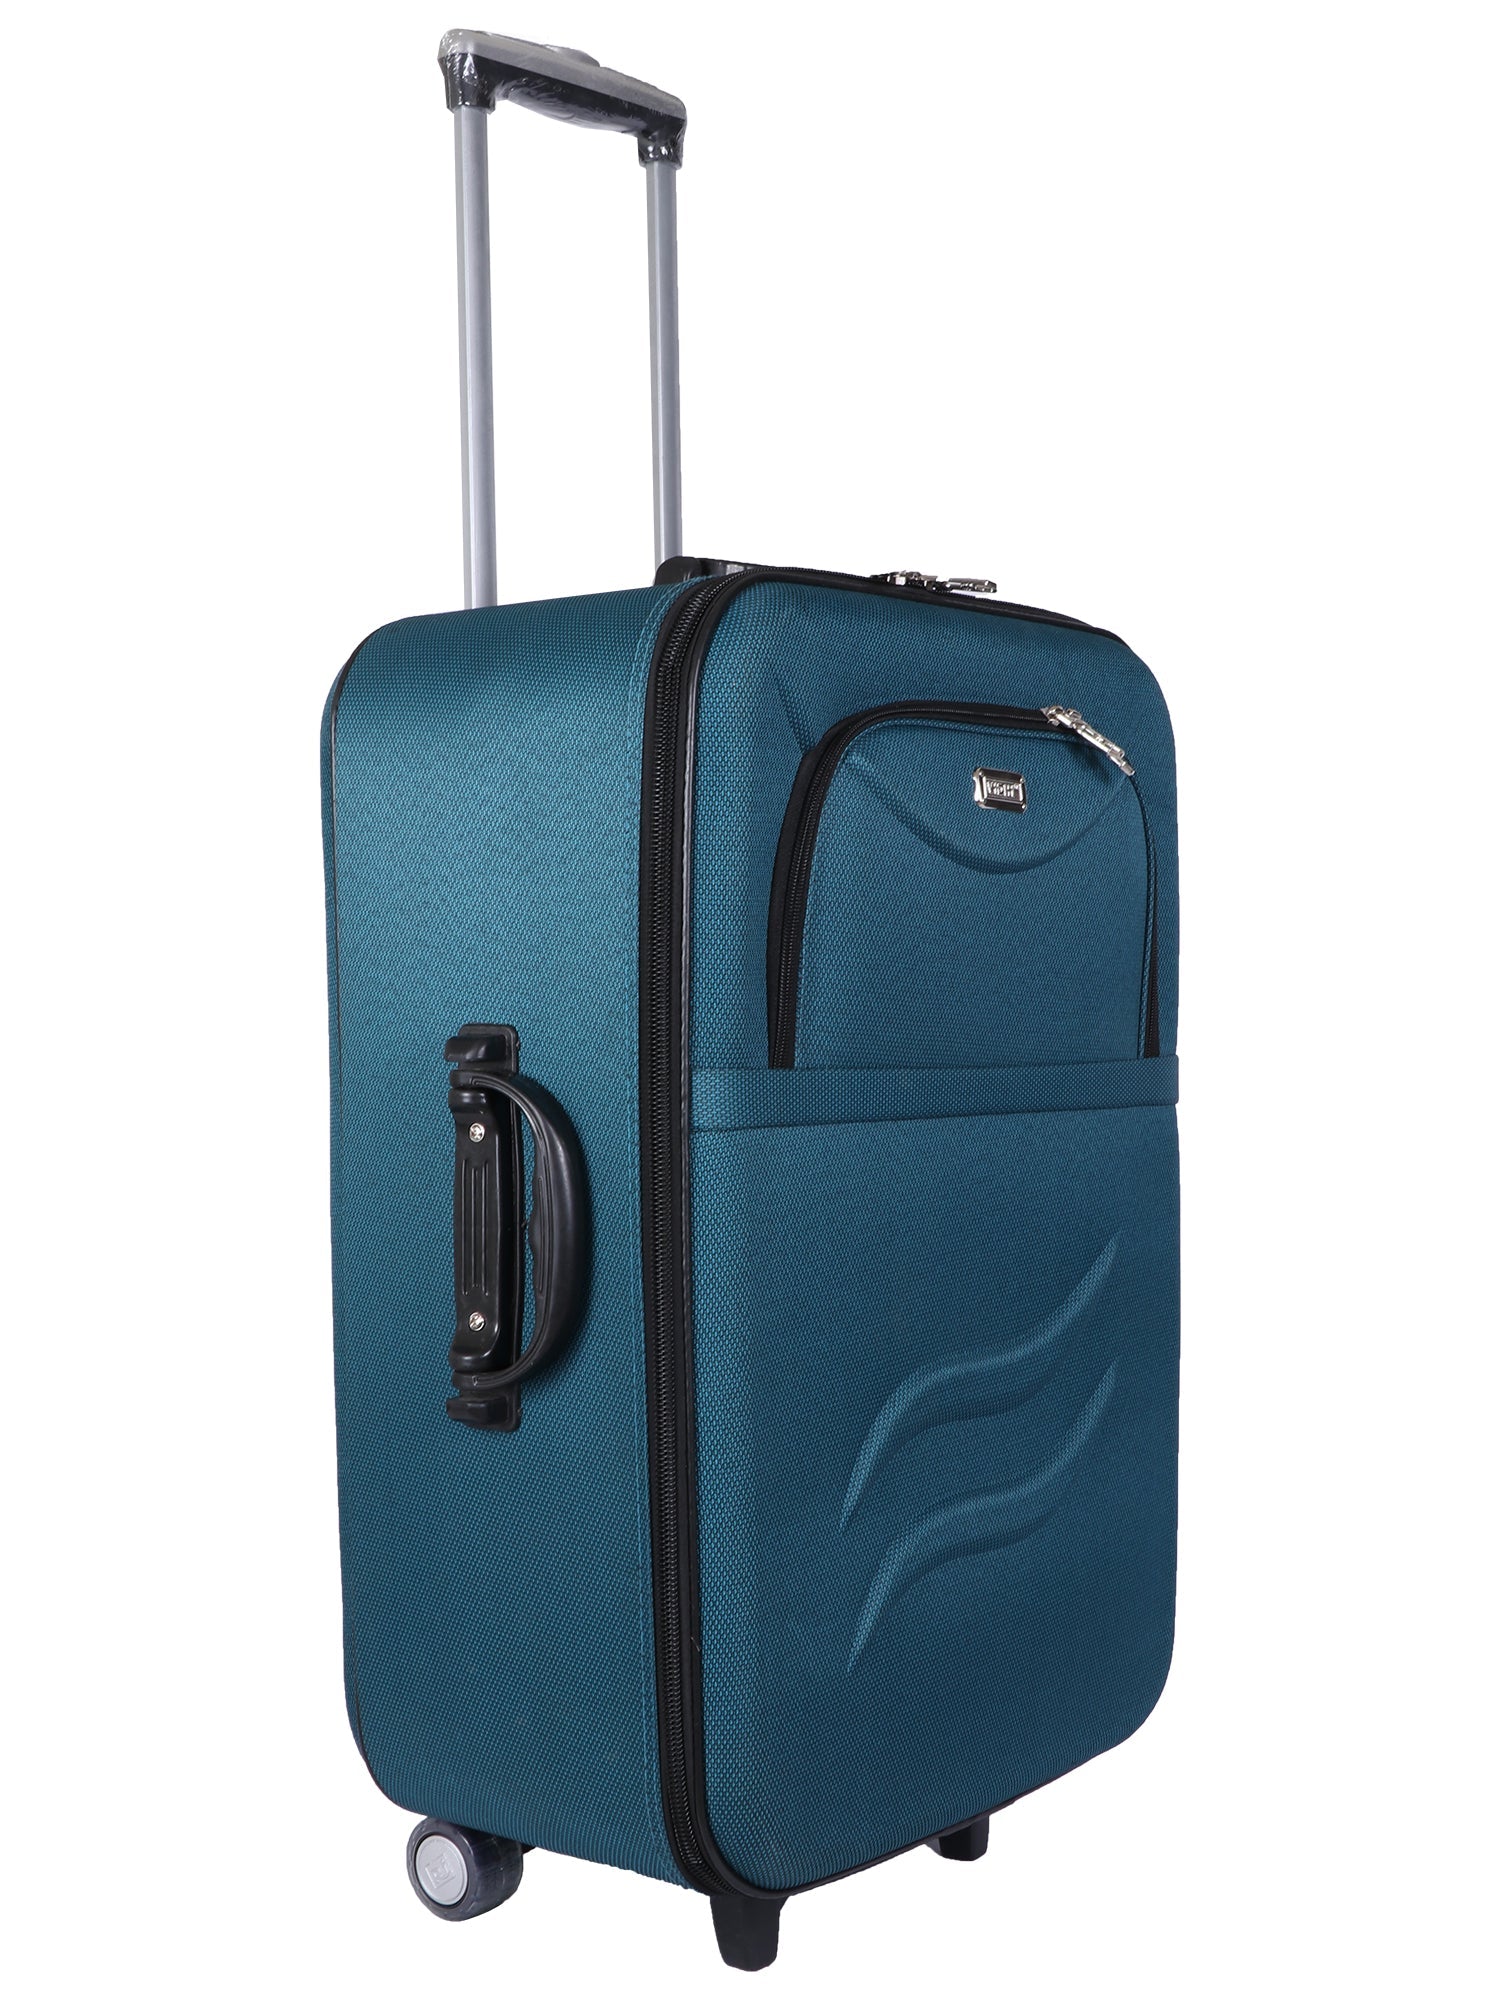 Luggage Bags & Suitcases | Buy Online | Konga Online Shopping